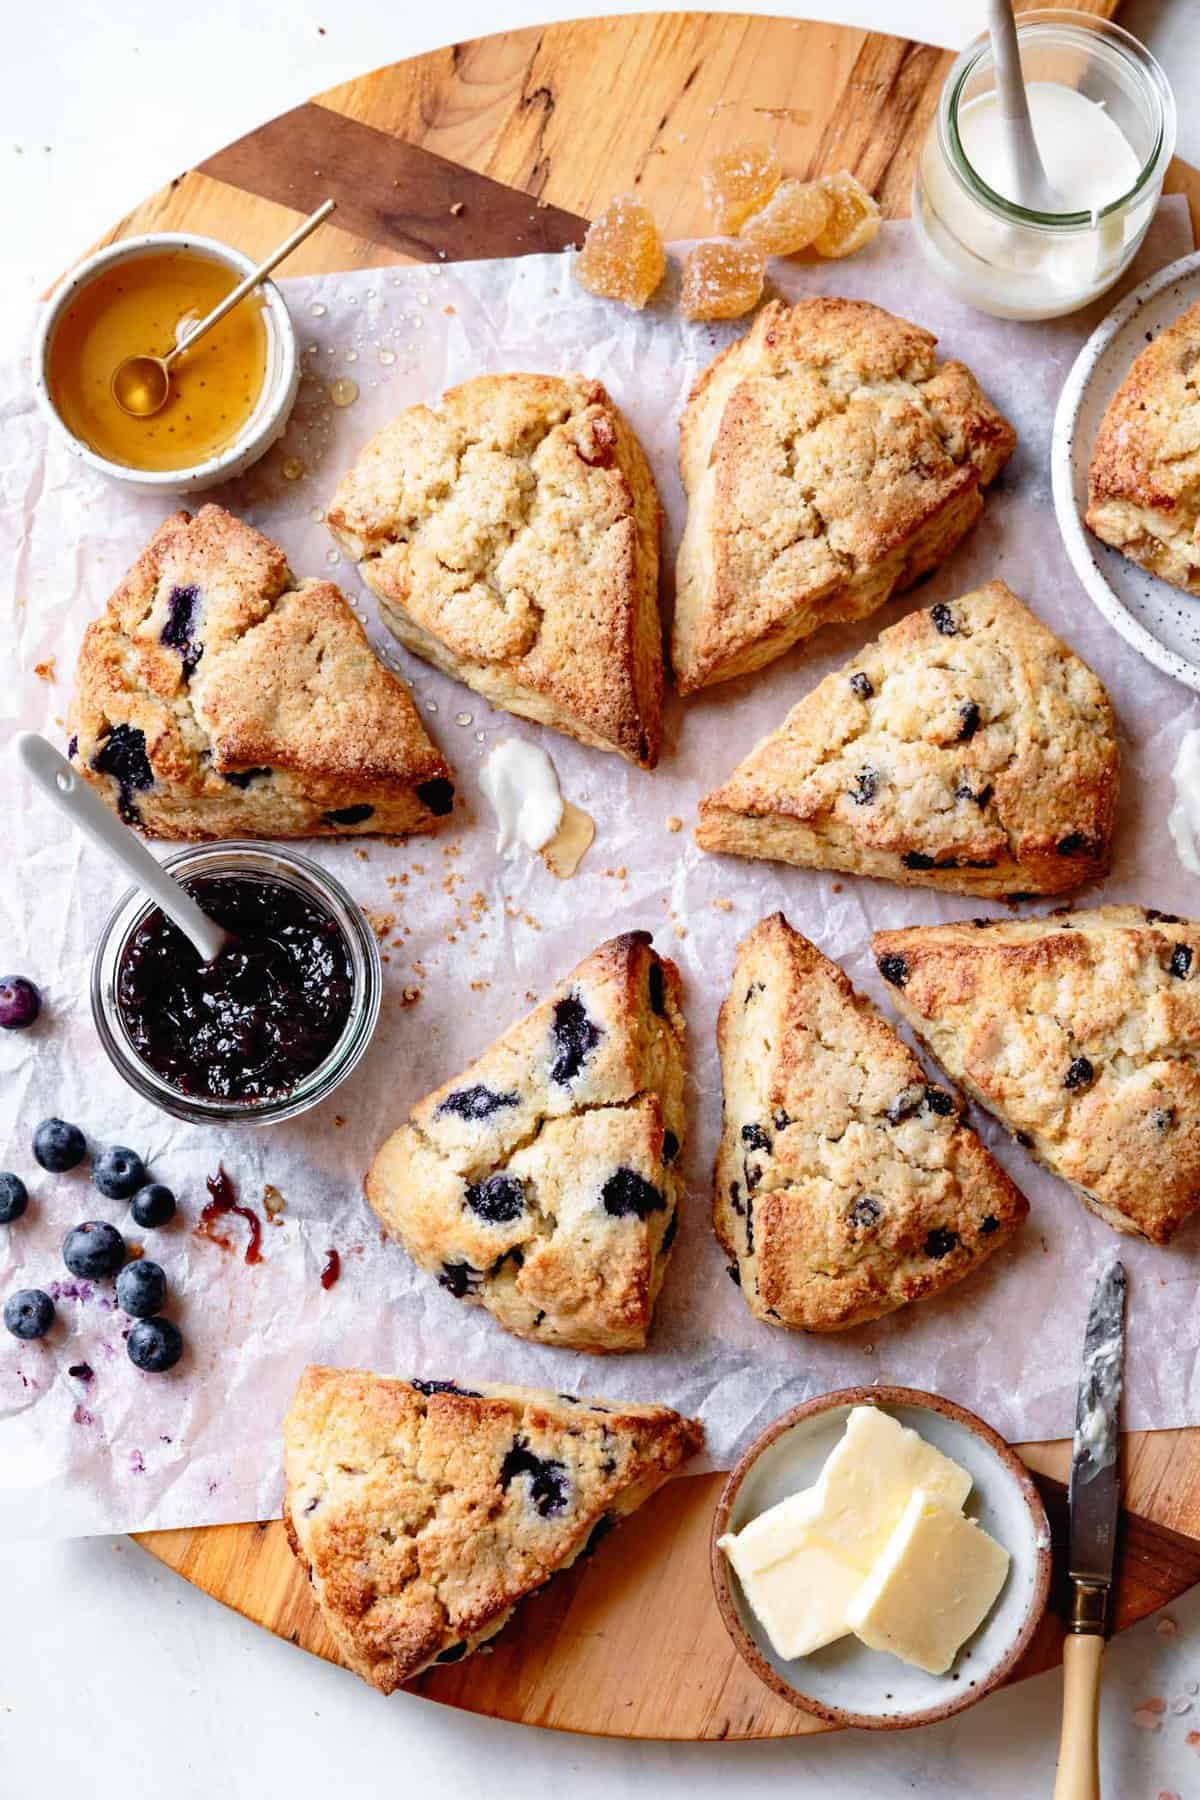 a variety of gluten-free scones on a large wooden board with honey, jam, and butter